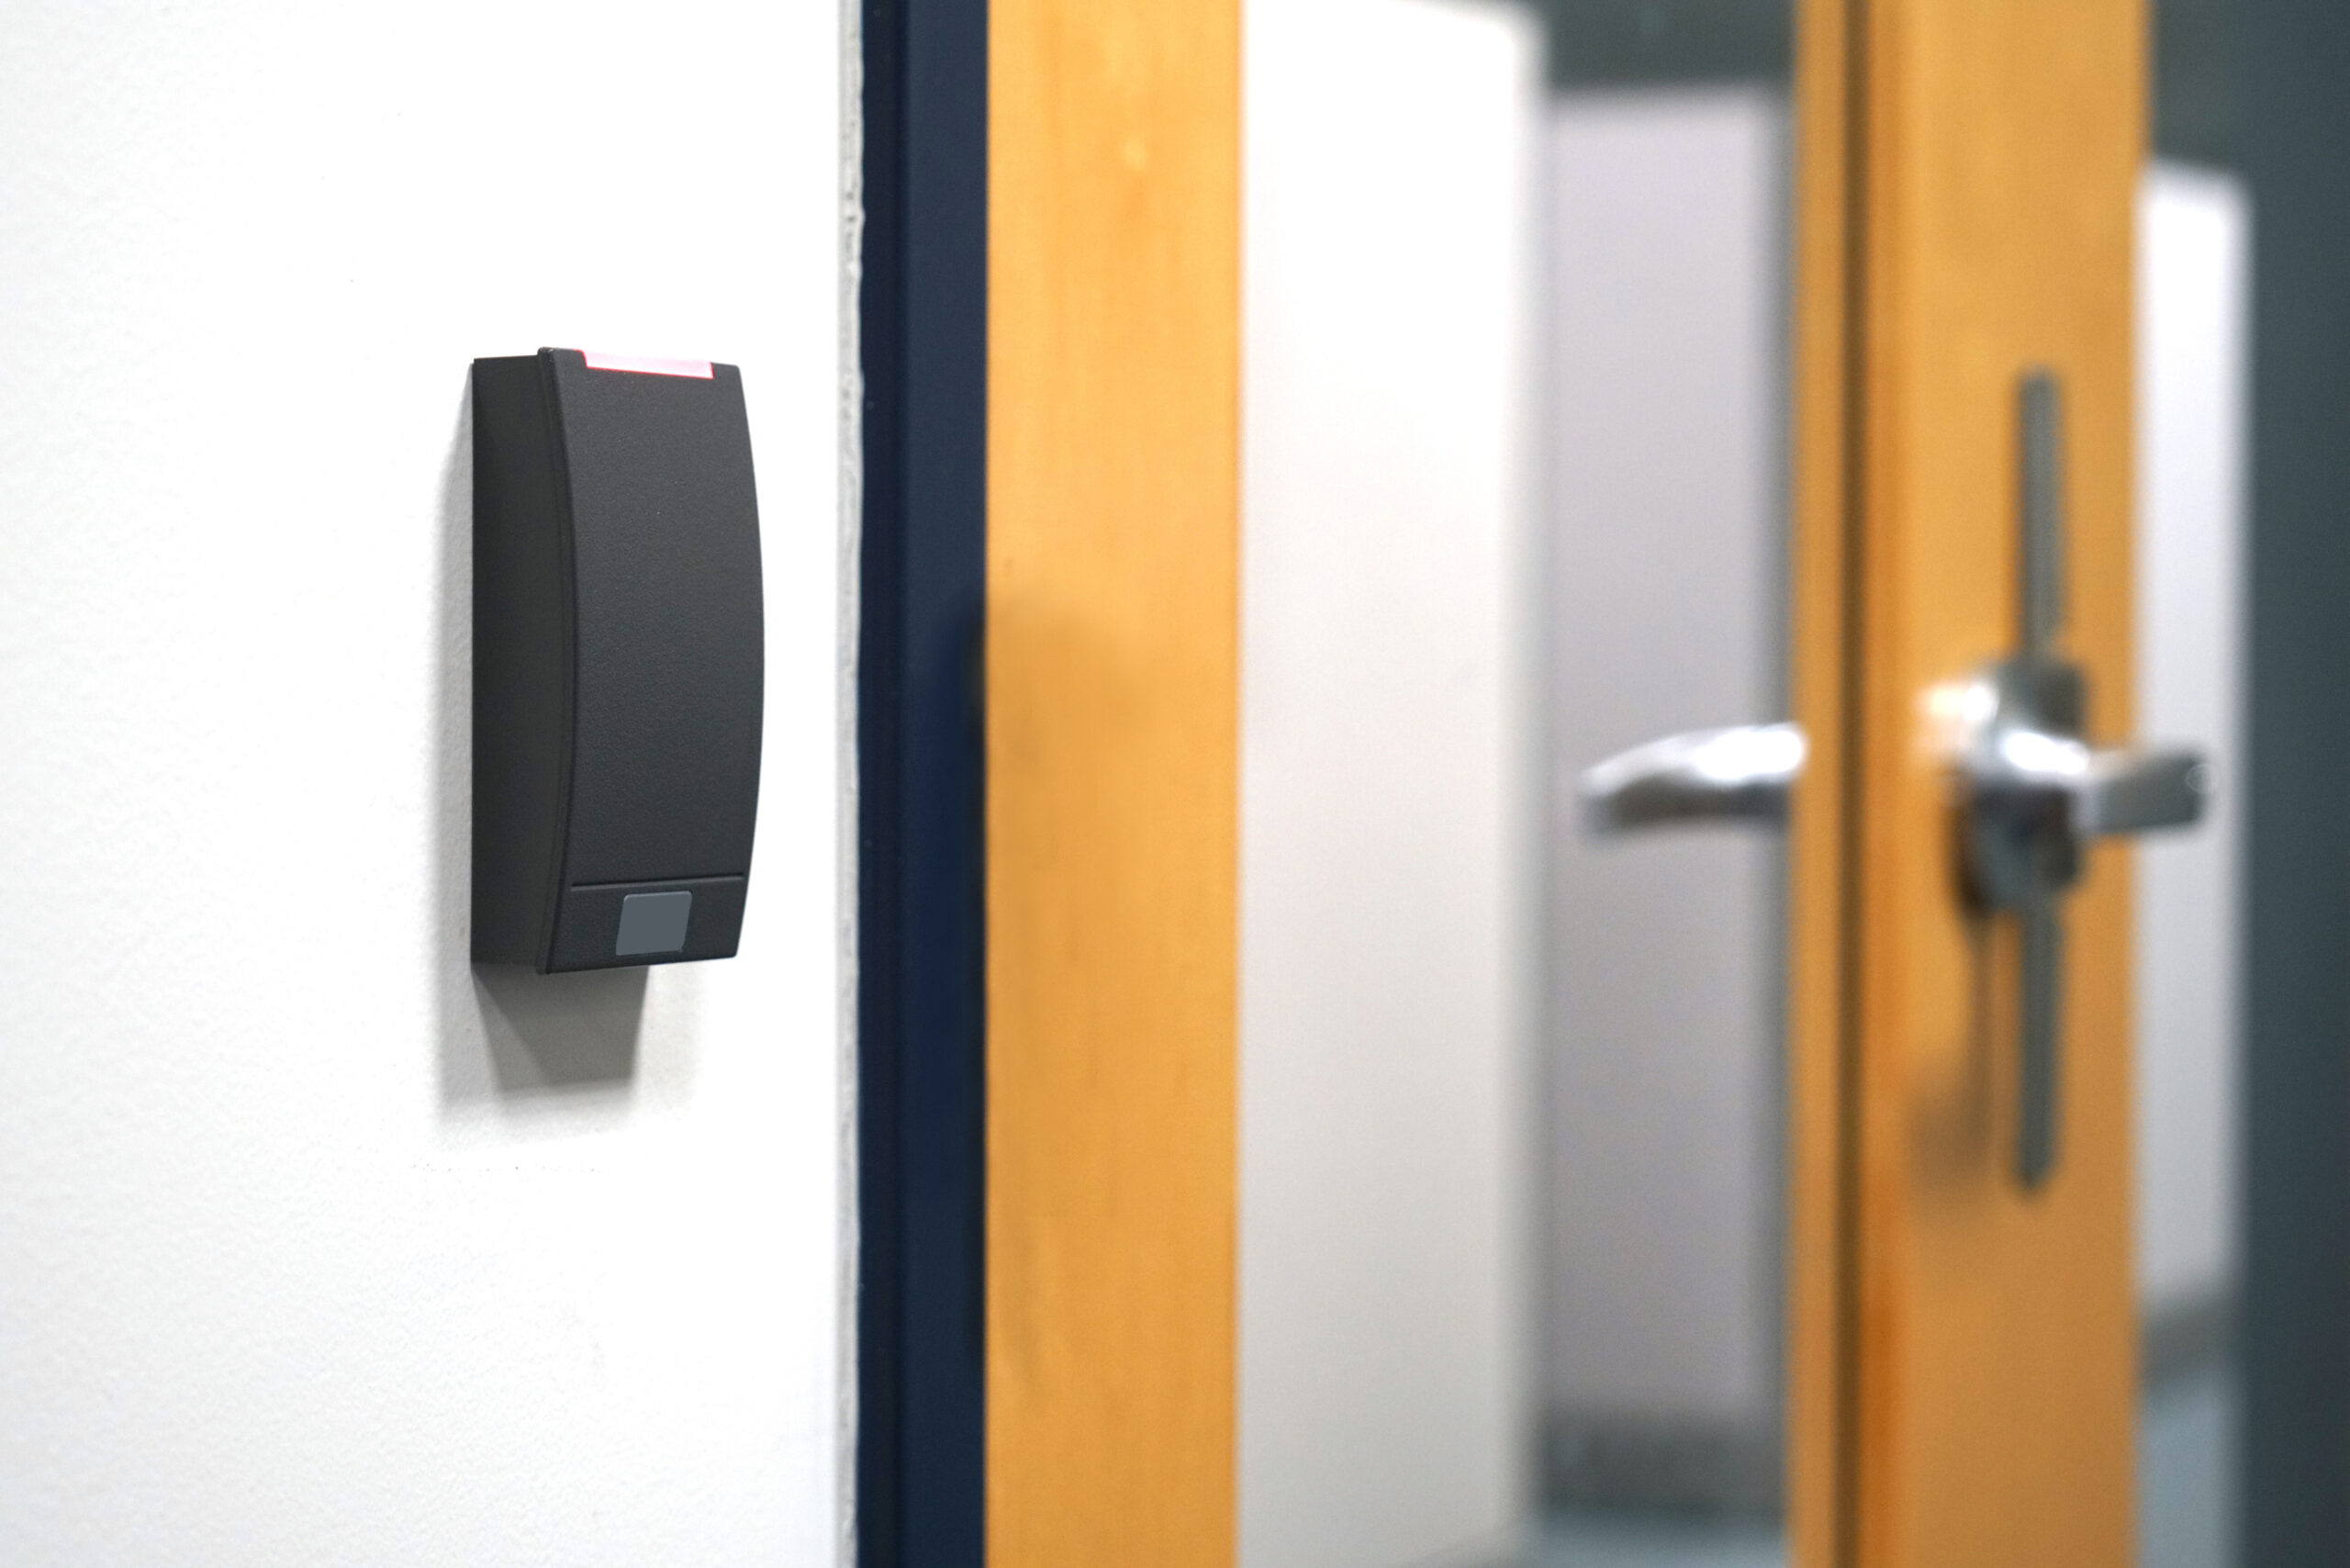 door entrance card reader of security system in the office building